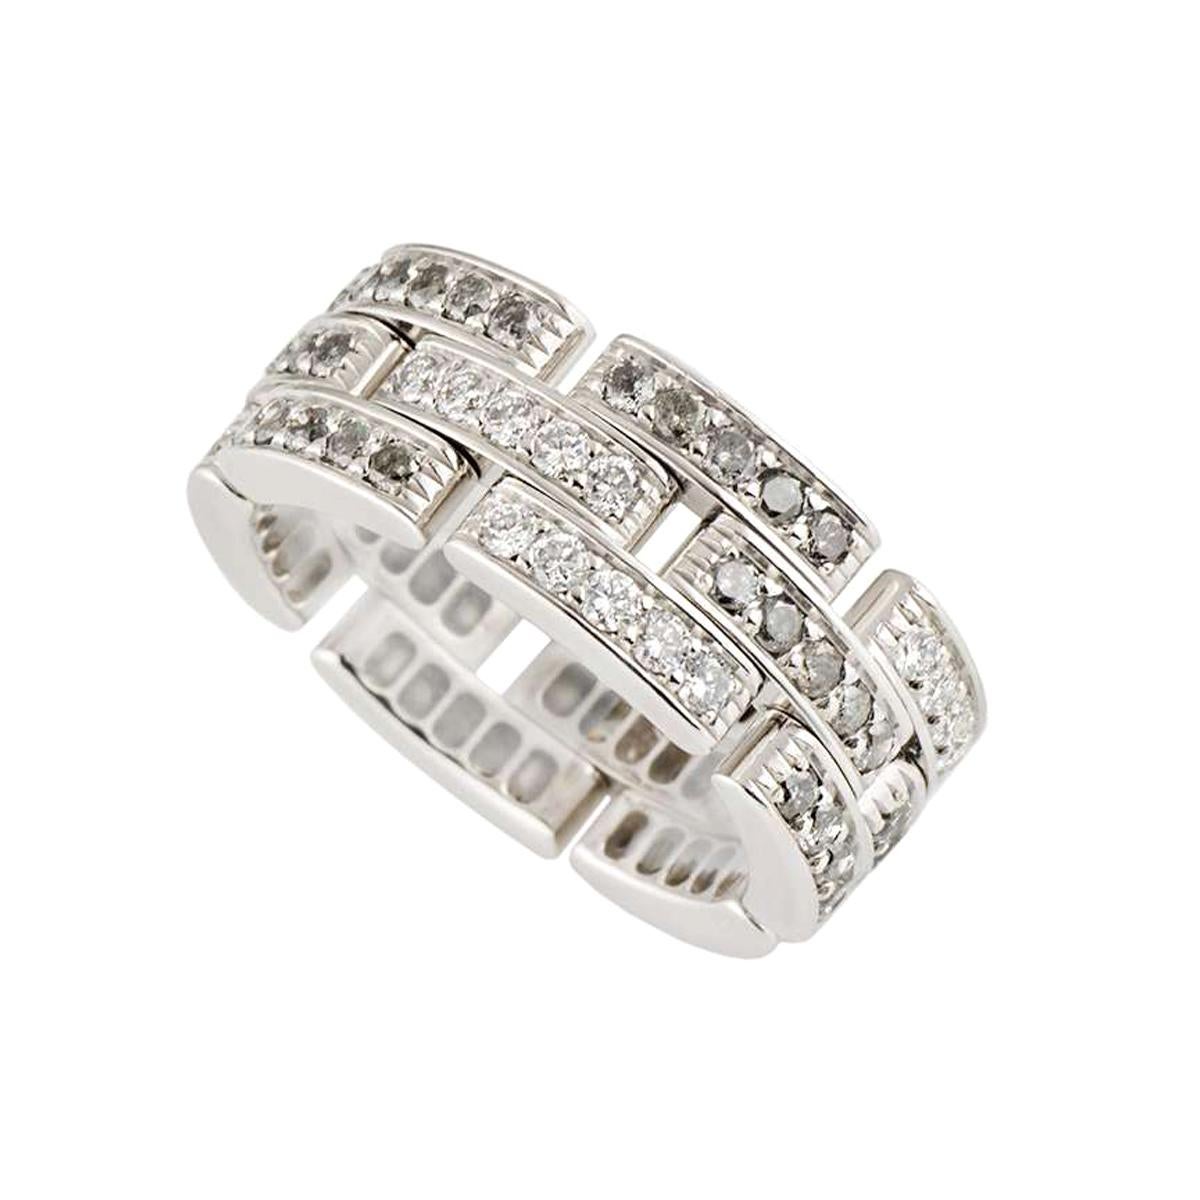 Cartier Maillon Panthere Diamond Links and Chain Ring 1.53 Carat